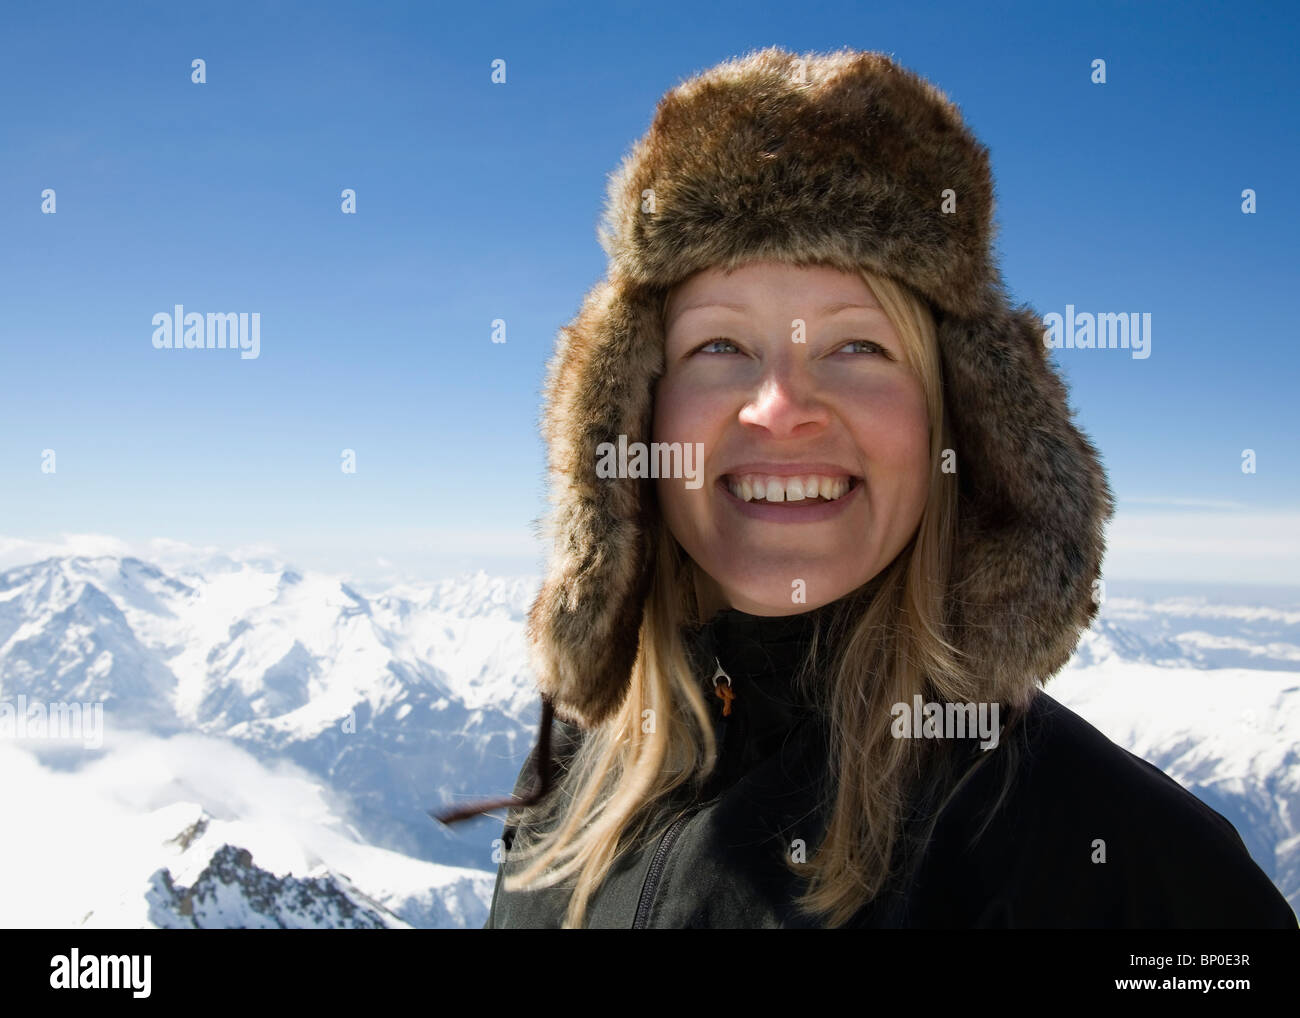 Woman with fur hat on mountain top Stock Photo